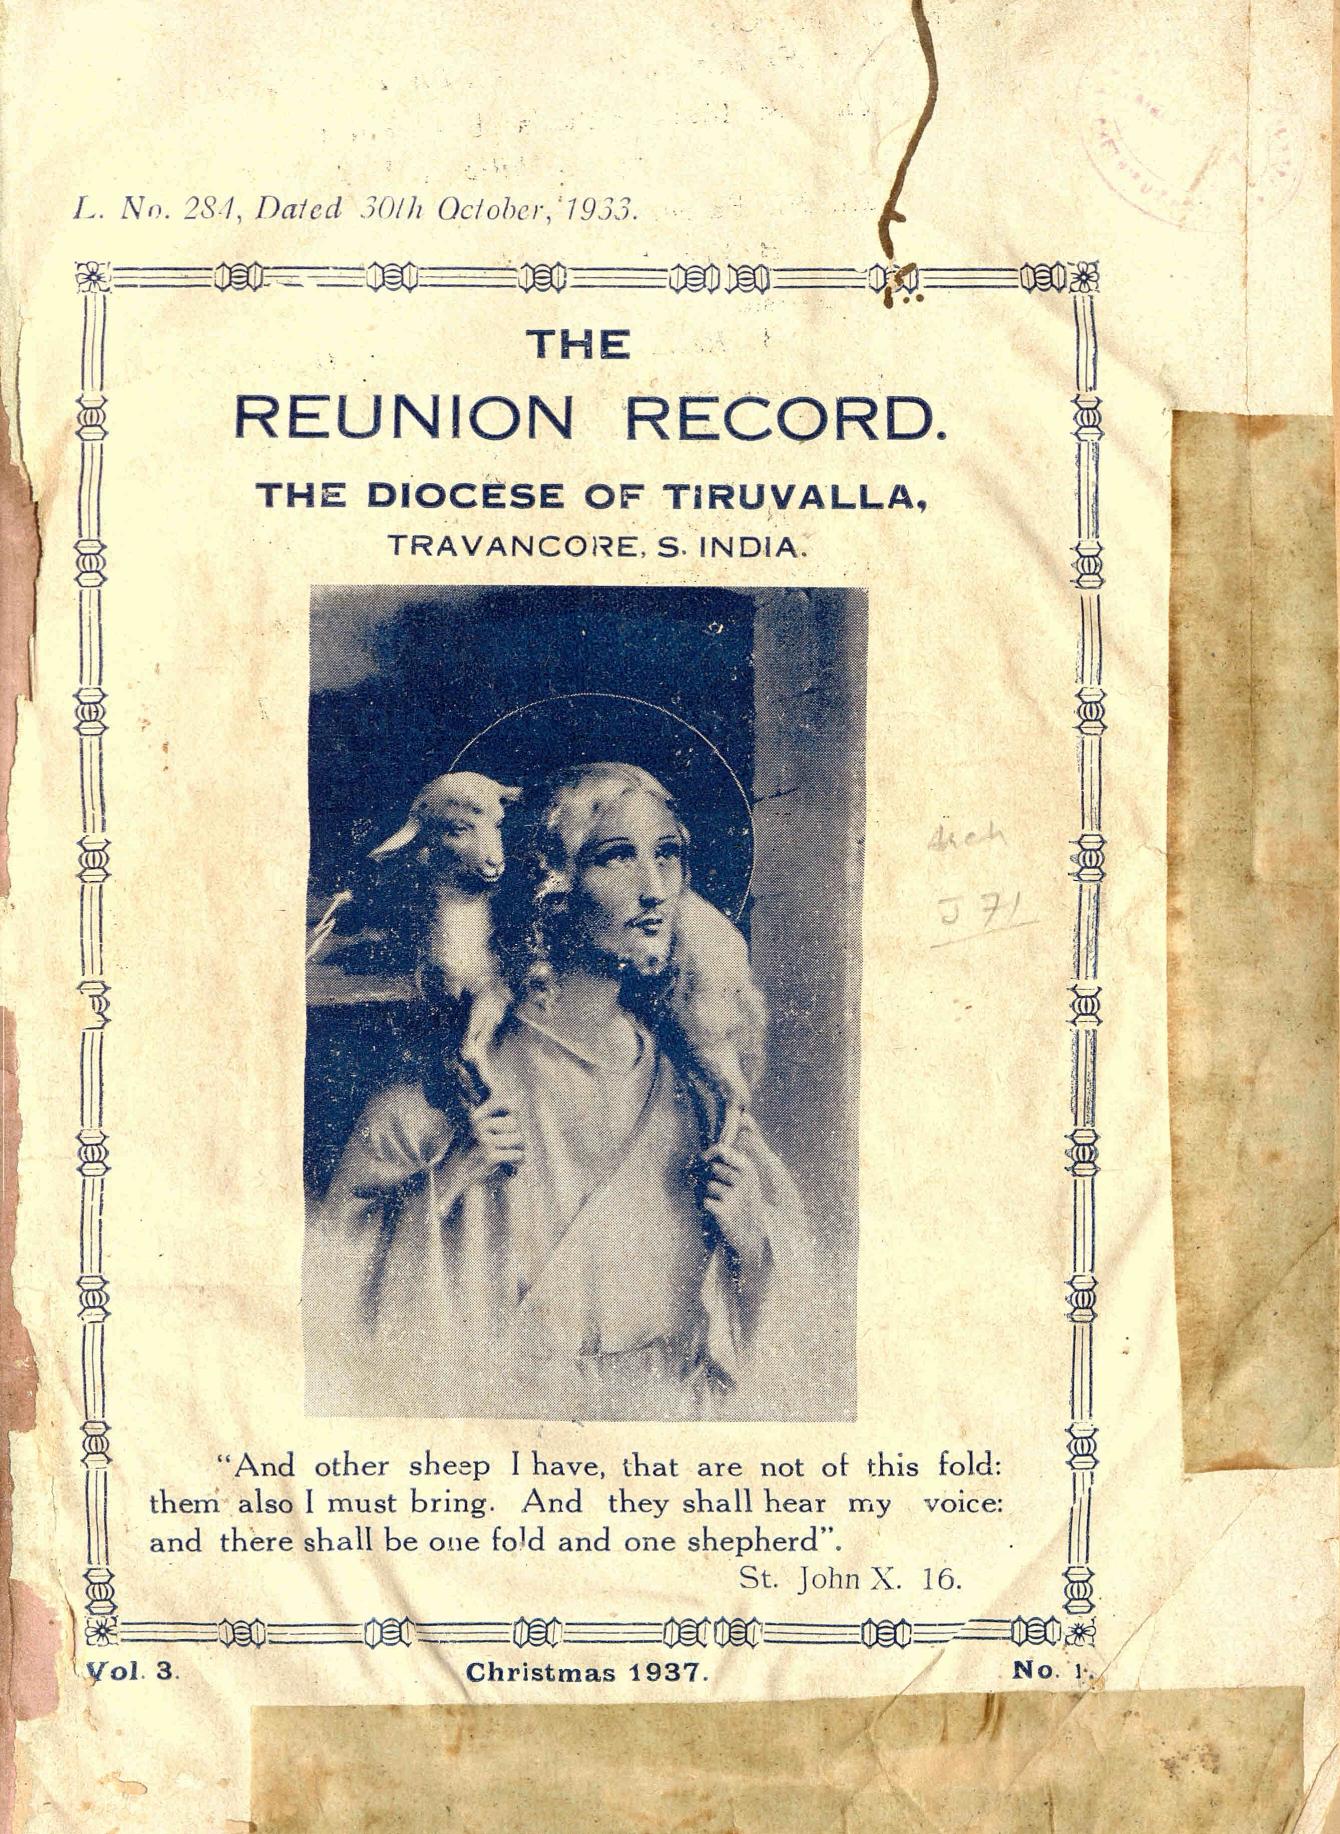 1937 - The Reunion Record - The Diocese of Thiruvalla